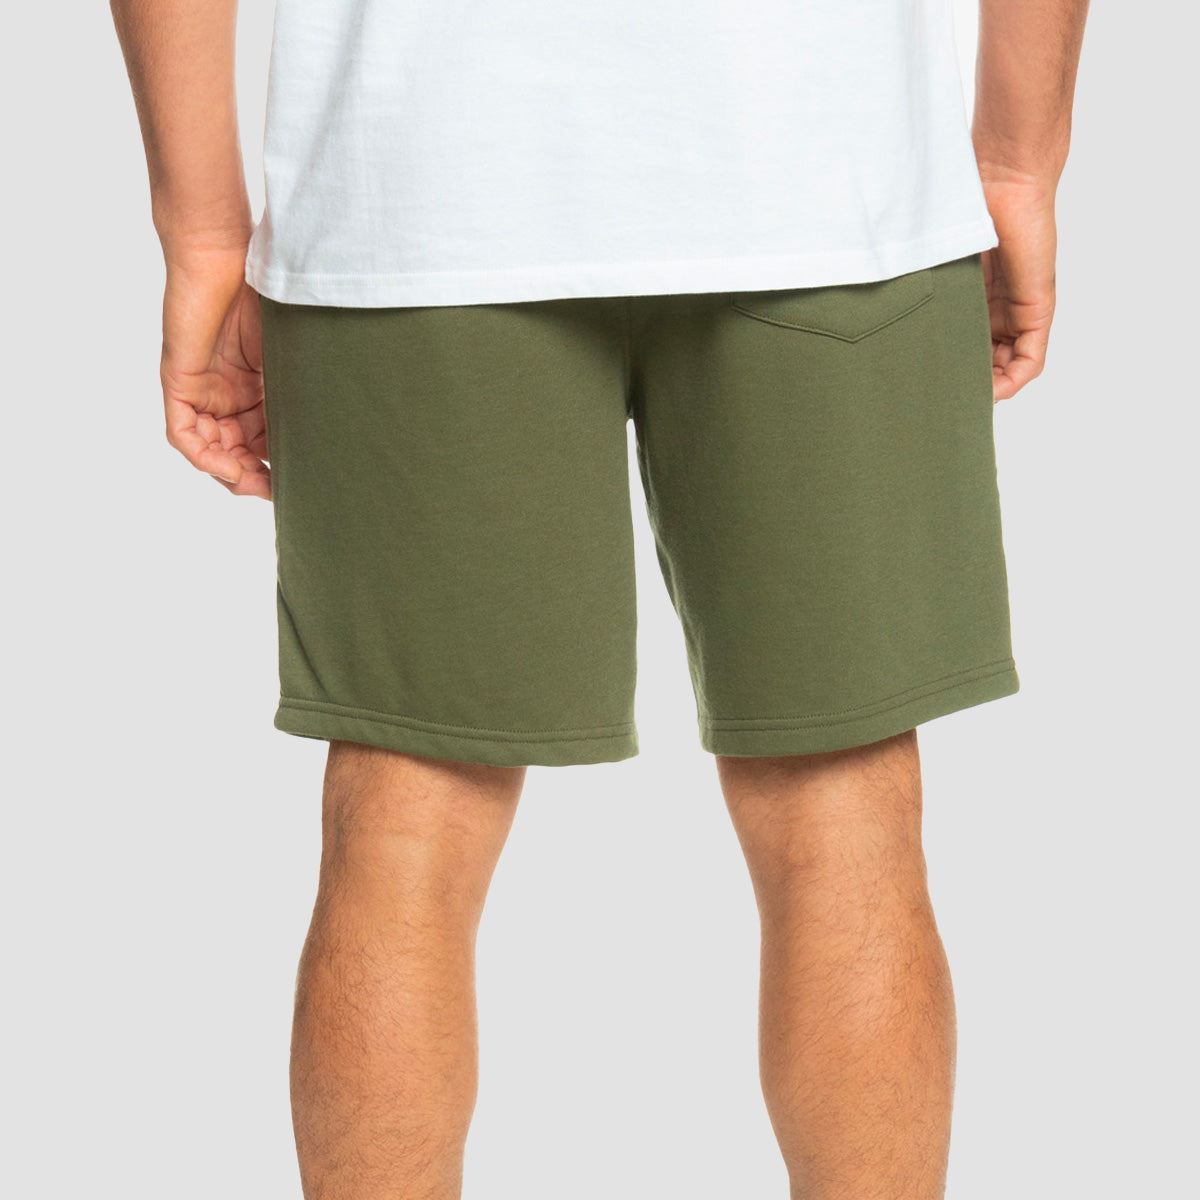 Shorts Four Quiksilver Sweat Clover Leaf Surf Local